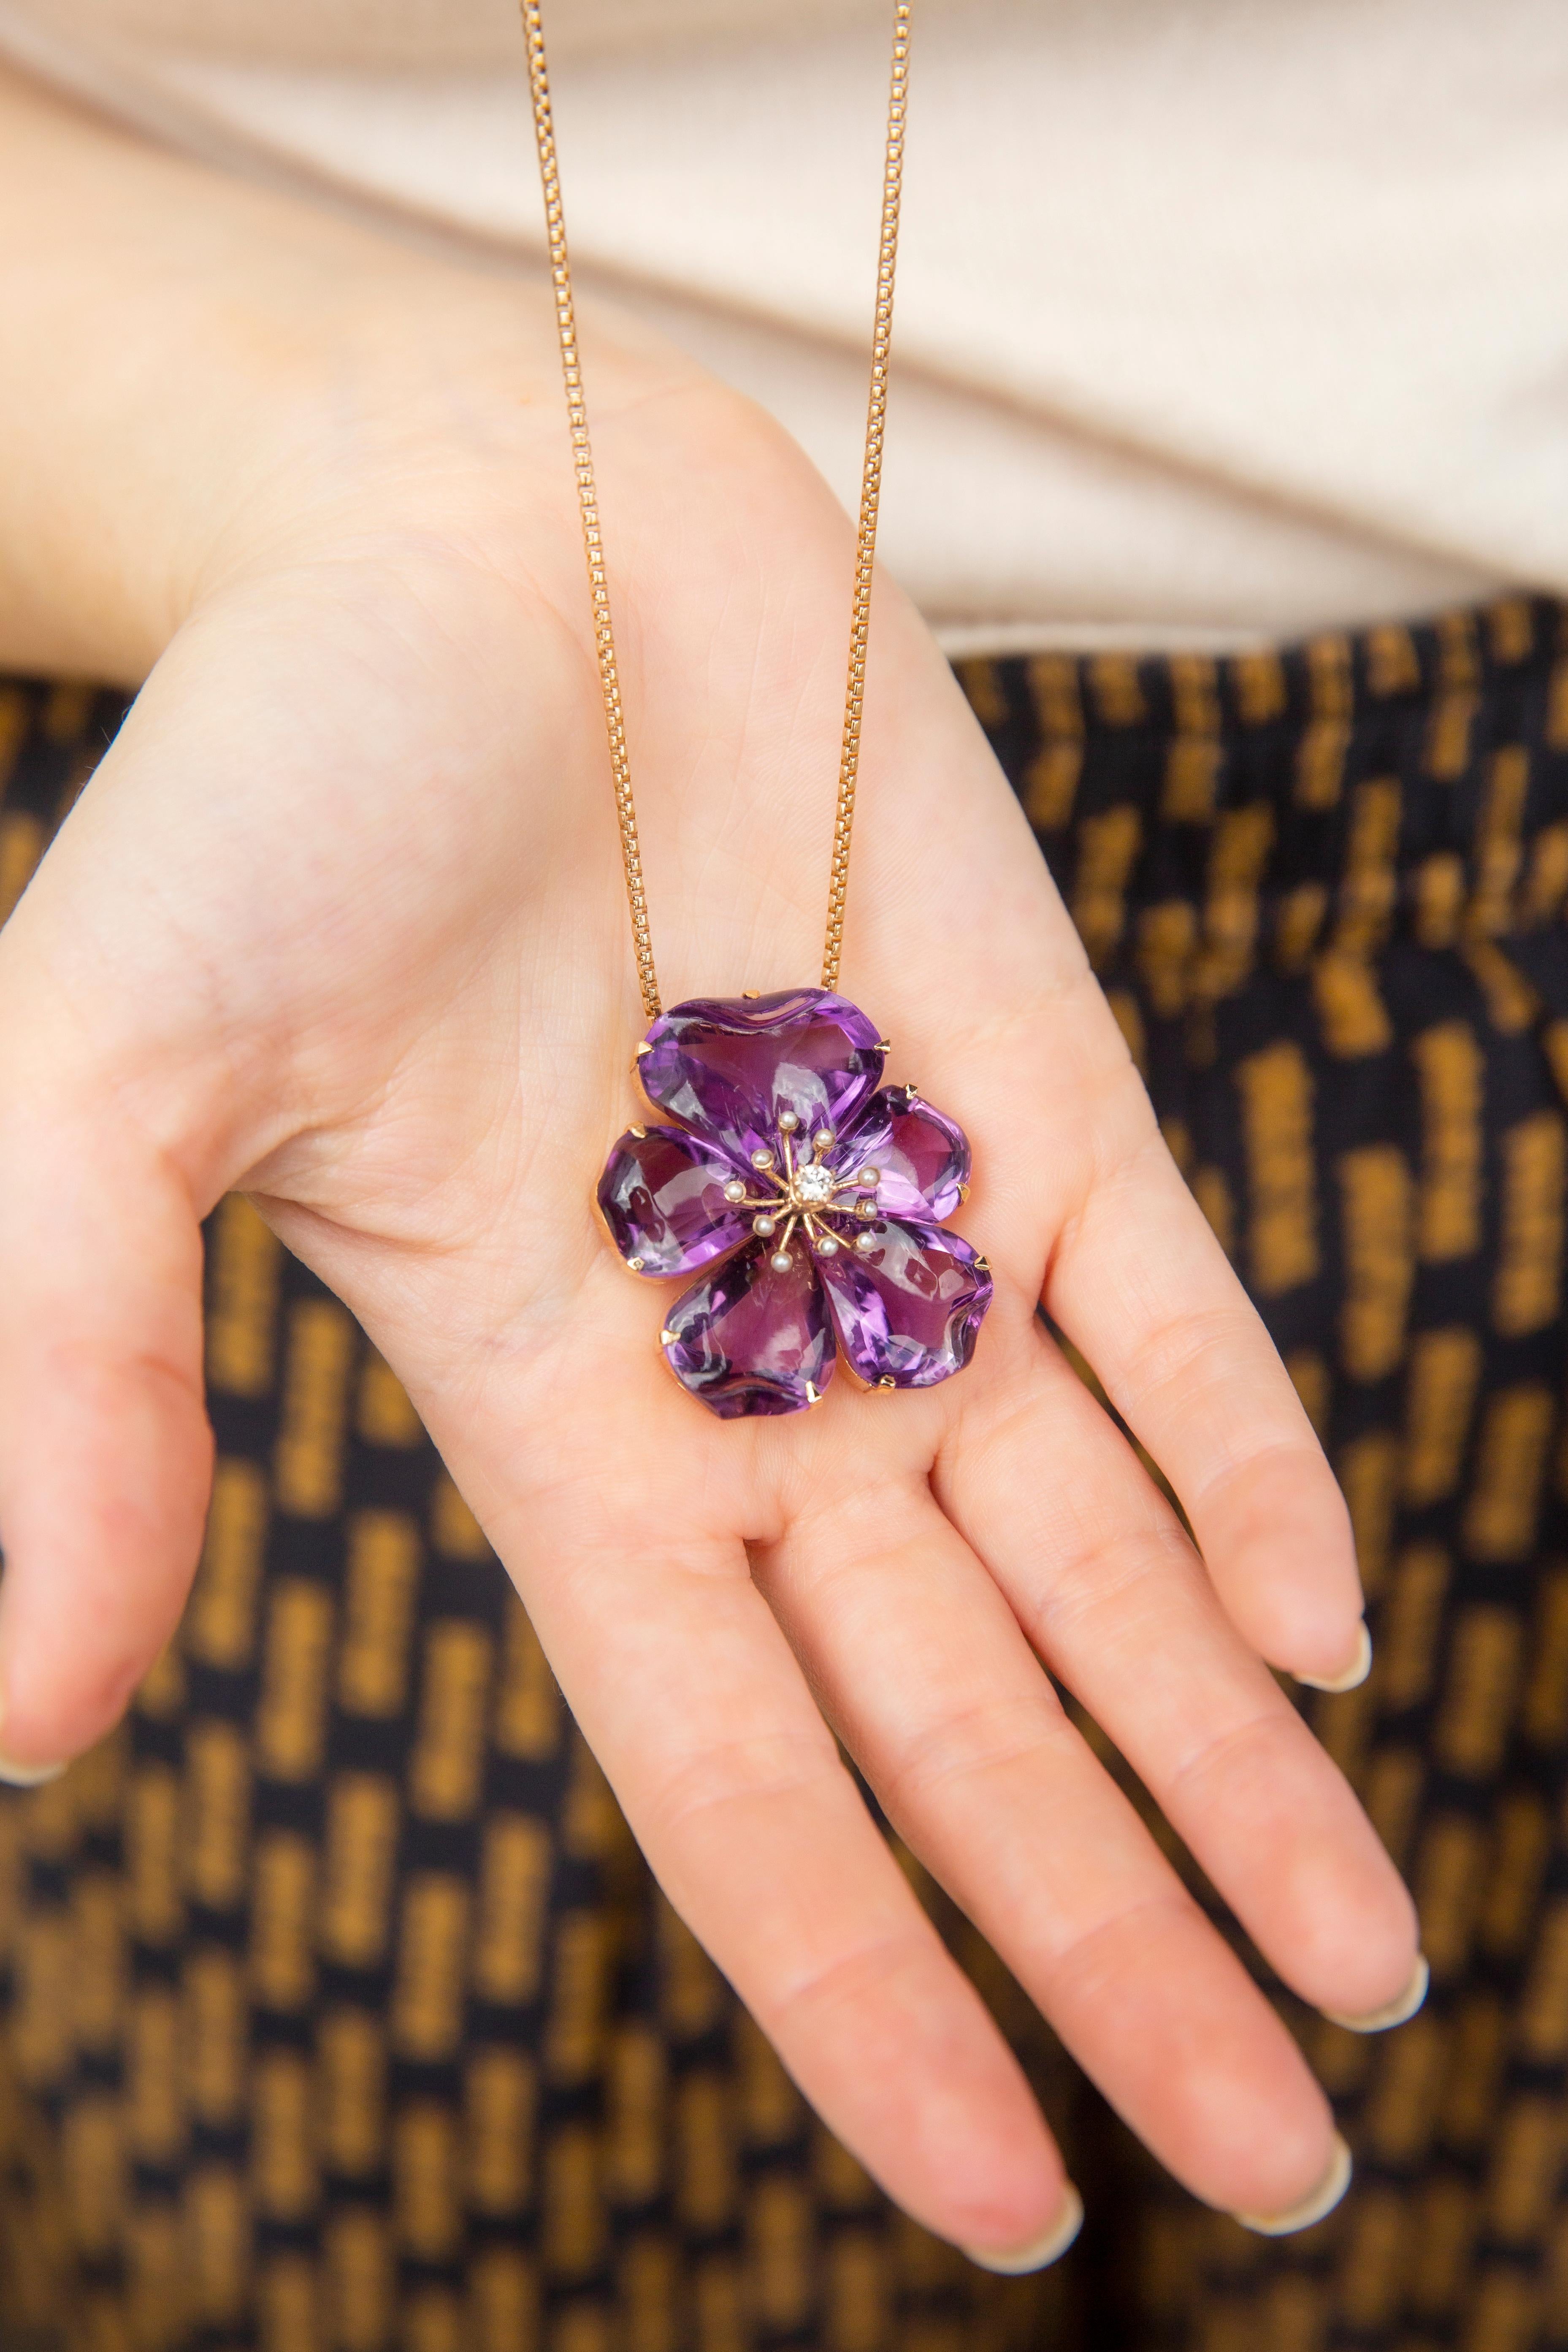 Winter comes, her icy breath blanketing the land,
Life yields, surrendering to frigid months ahead,
One remains, perfect in her gentleness,   
Purple hues evoking memories of warm summers.

The 14 carat gold Arabella is fitted with a 9 carat gold